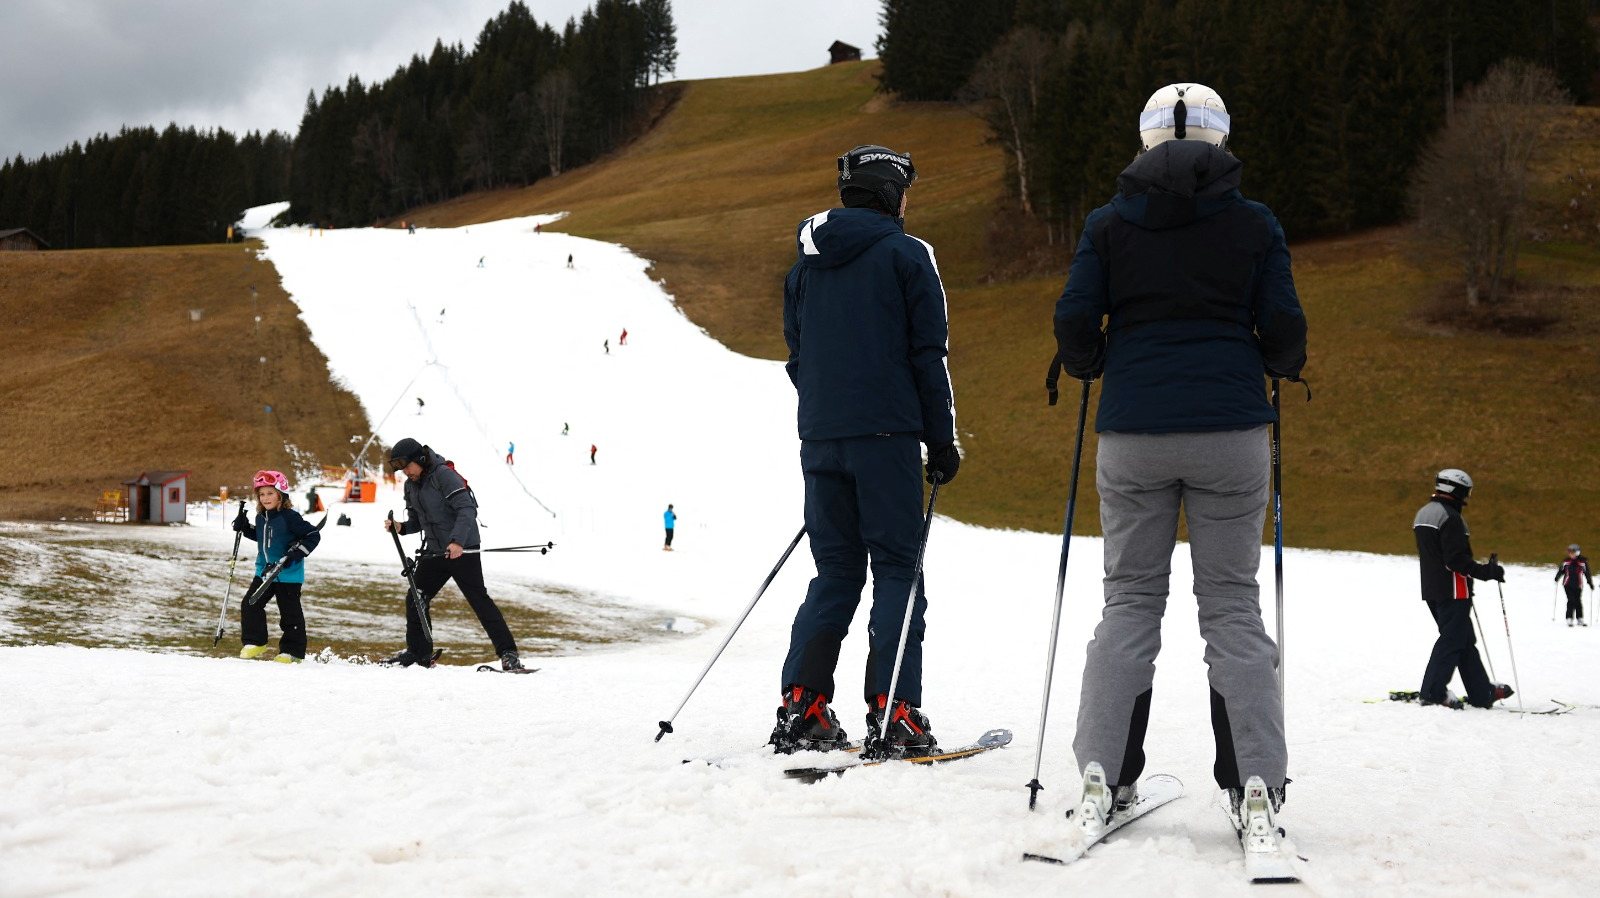 Skiers pass on a small layer of an artificial snow slope between grassland amid warmer-than-usual winter temperatures in the Alps in Filzmoos, Austria, January 5, 2023. REUTERS/Lisi Niesner